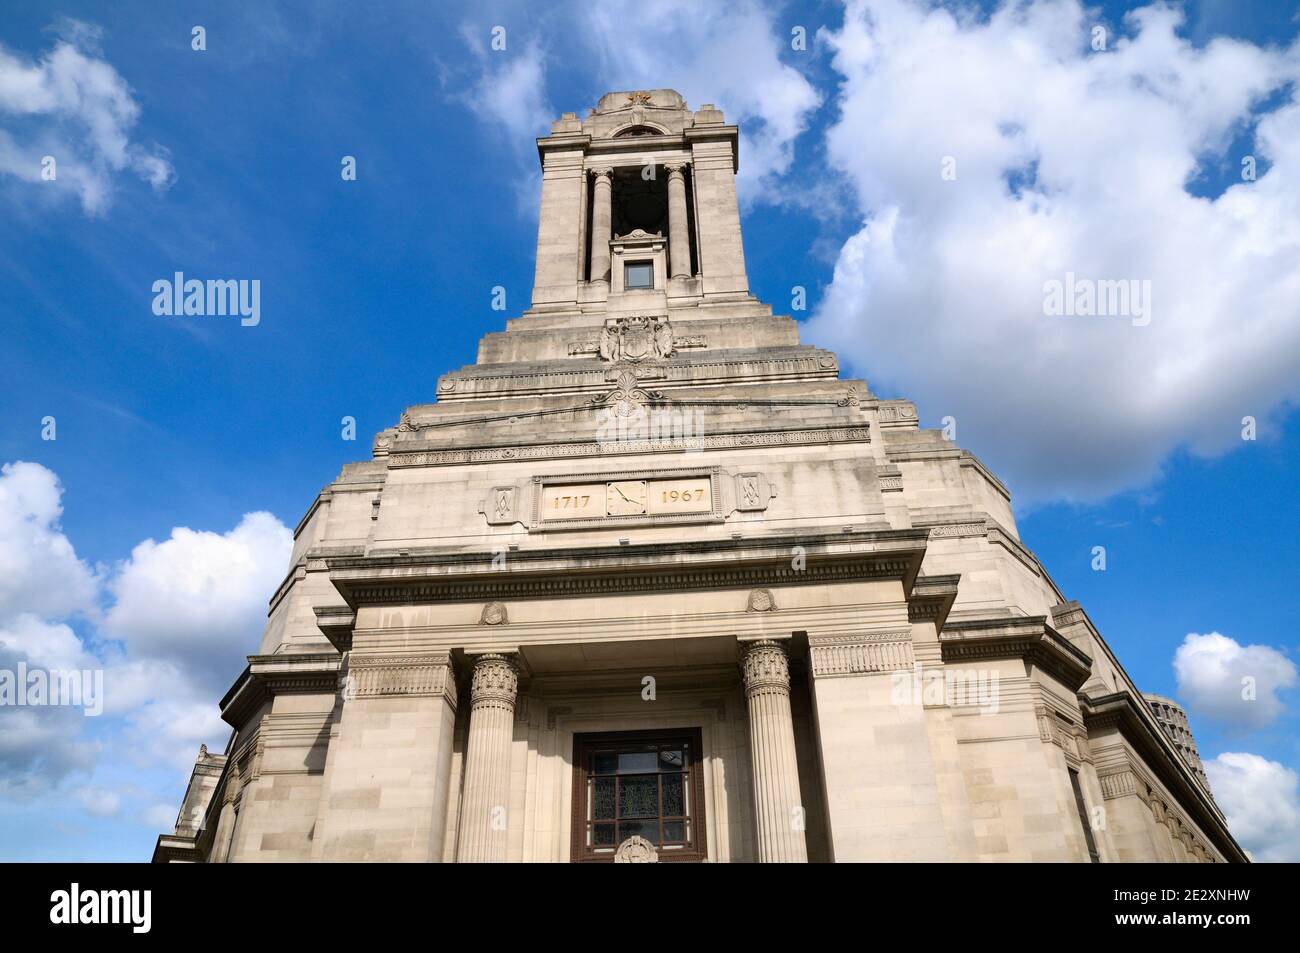 Freemasons' Hall, the headquarters of the United Grand Lodge of England and the principal meeting place for Masonic Lodges in London, England, UK Stock Photo